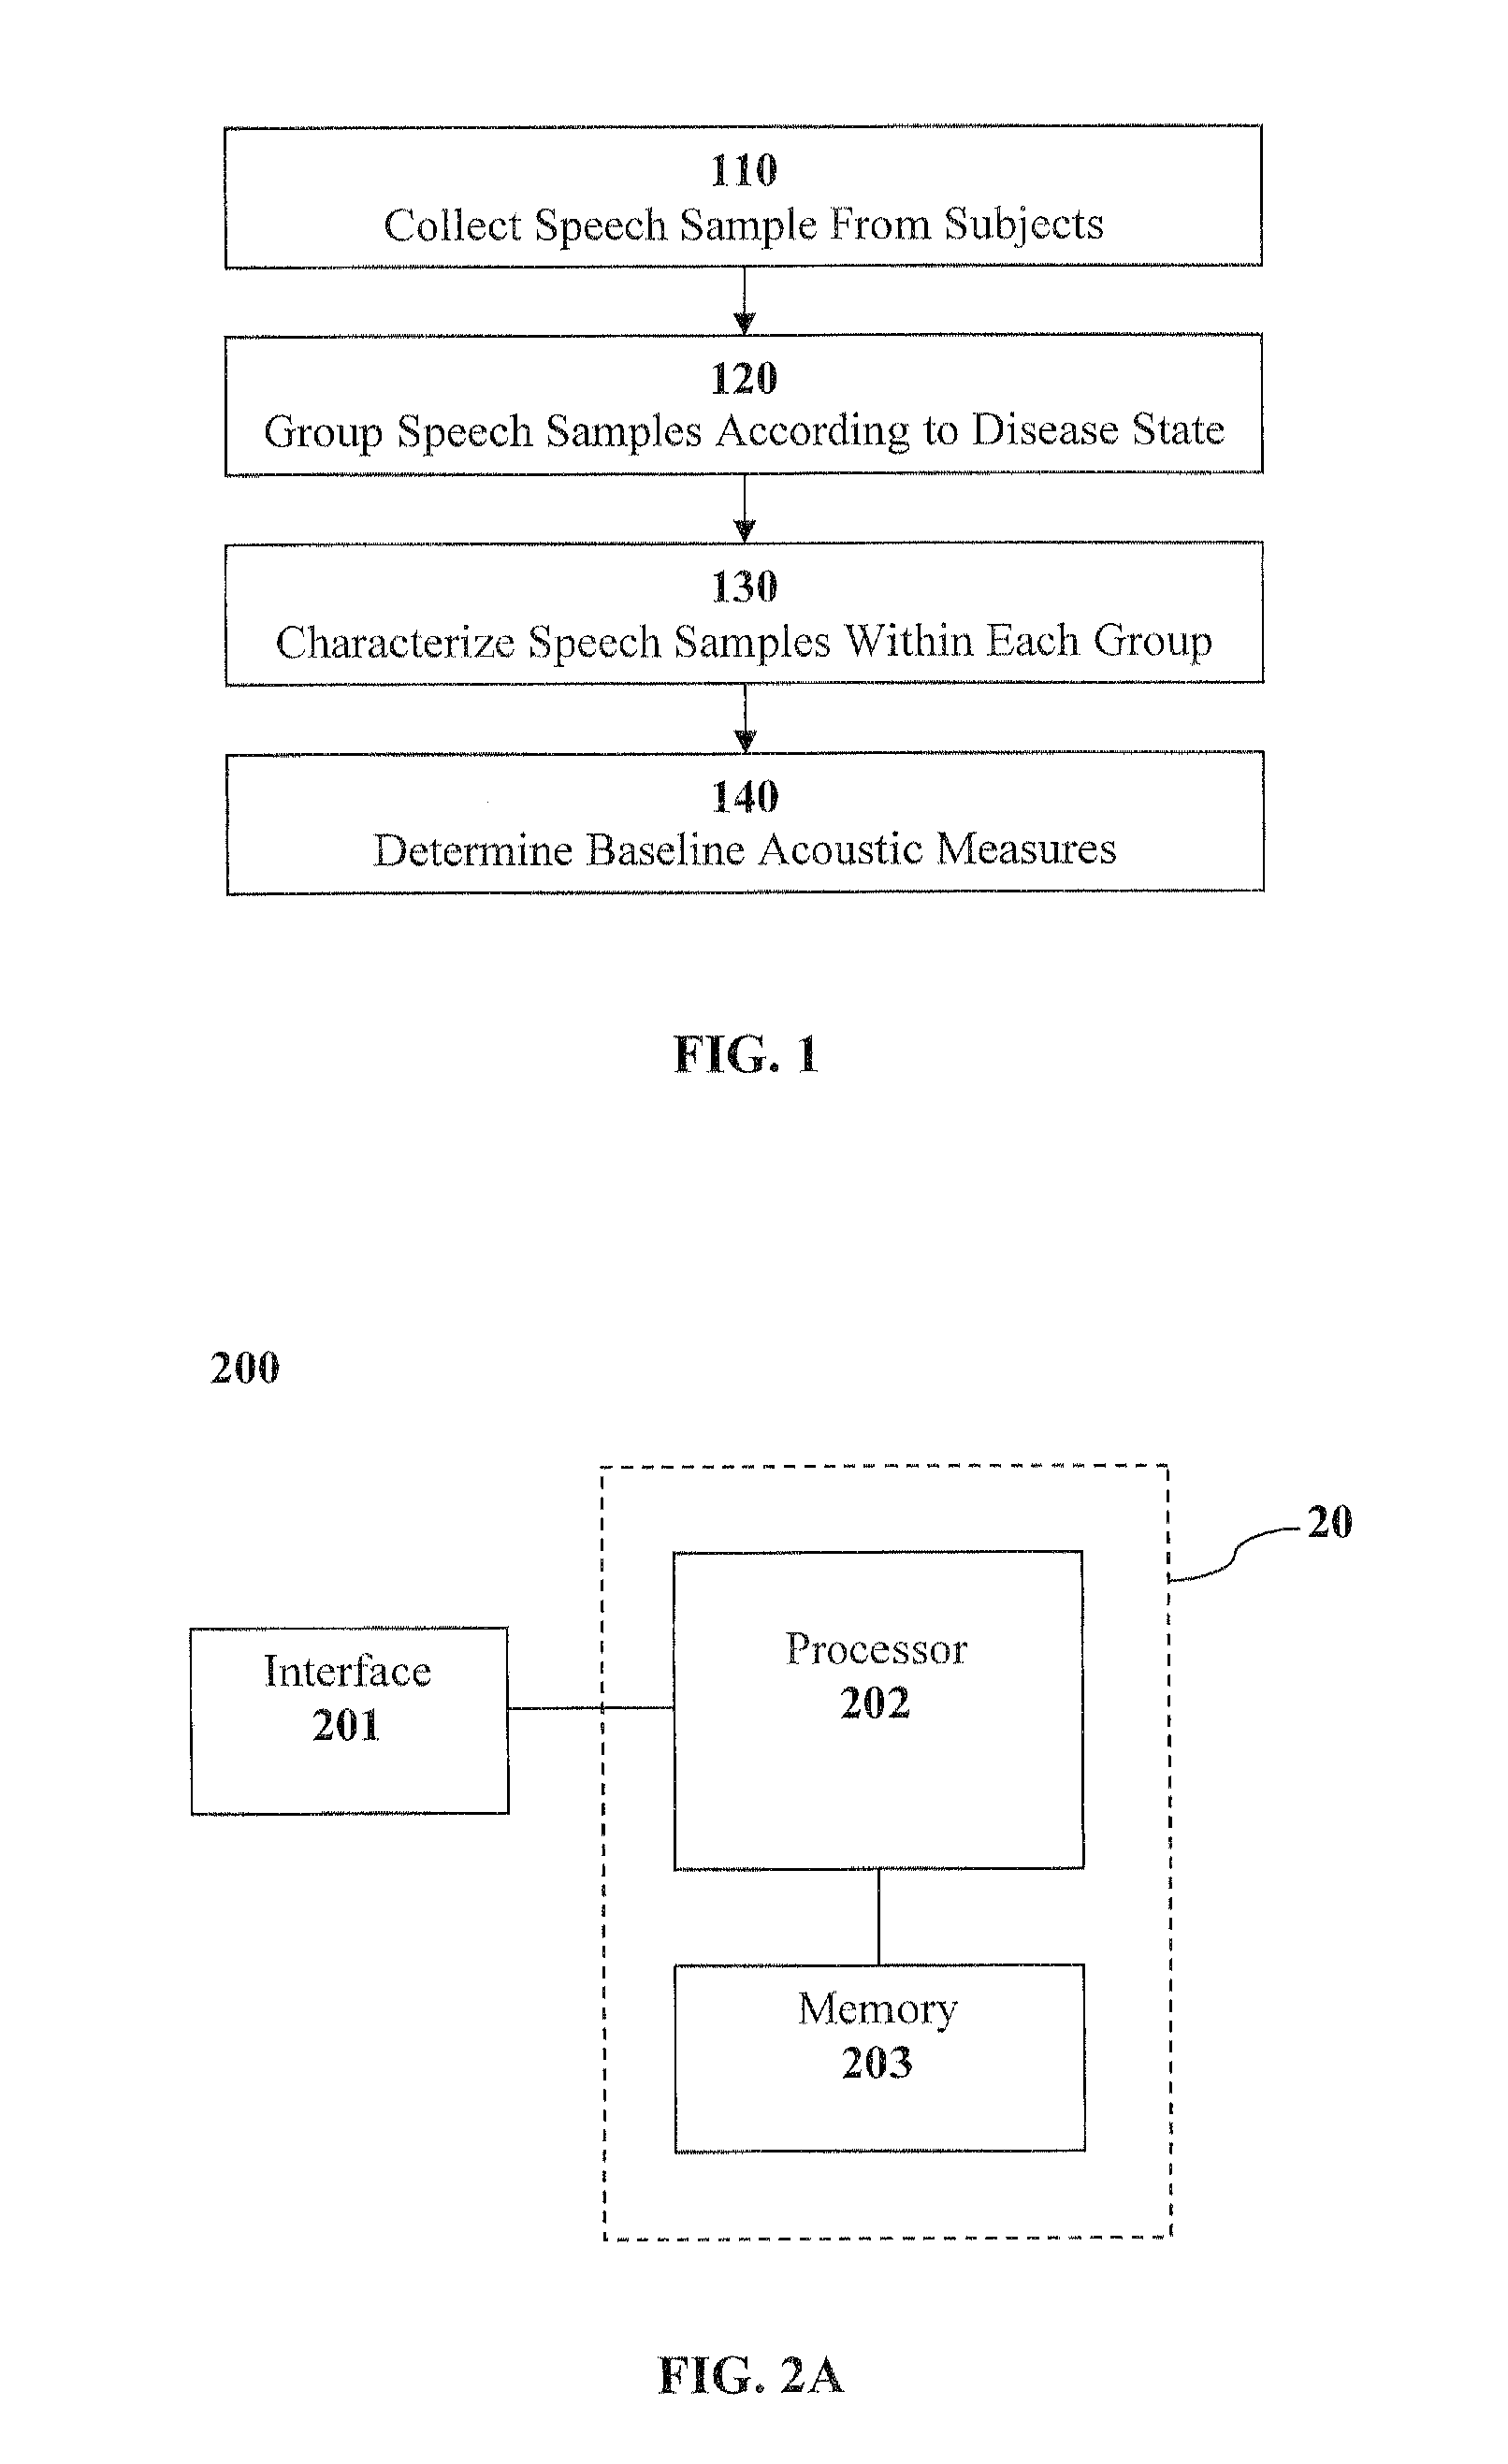 Systems and methods of screening for medical states using speech and other vocal behaviors